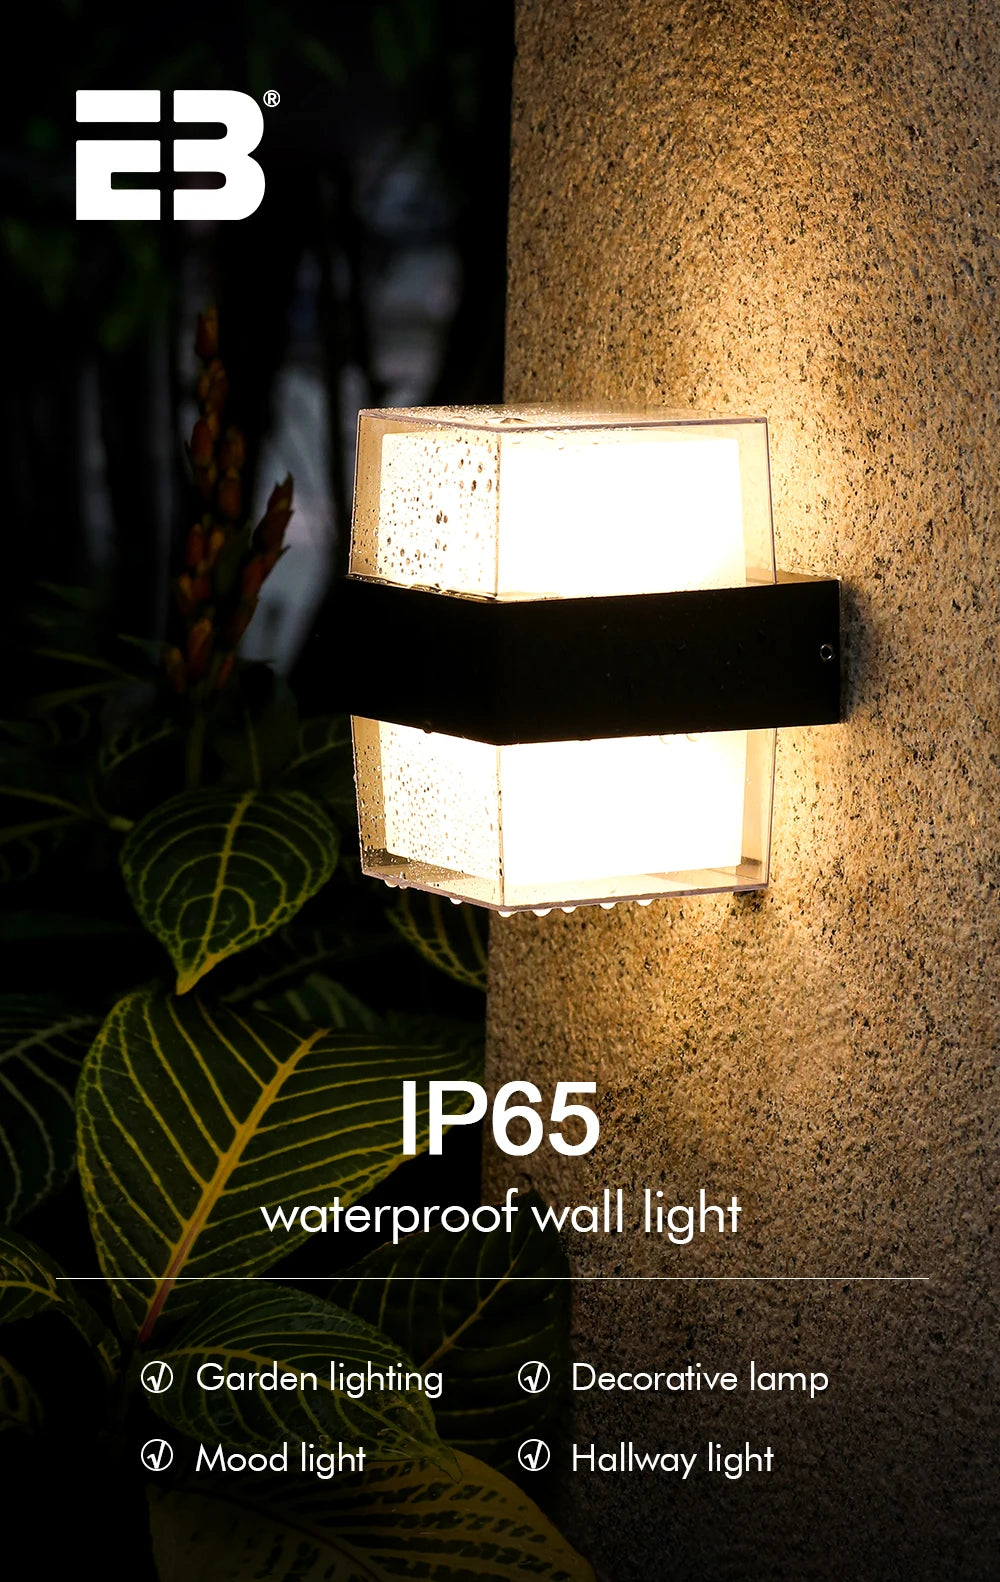 IP65 Waterproof Interior Wall Light, Waterproof LED light for outdoor and indoor use, ideal for decorative lighting in gardens, halls, and more.